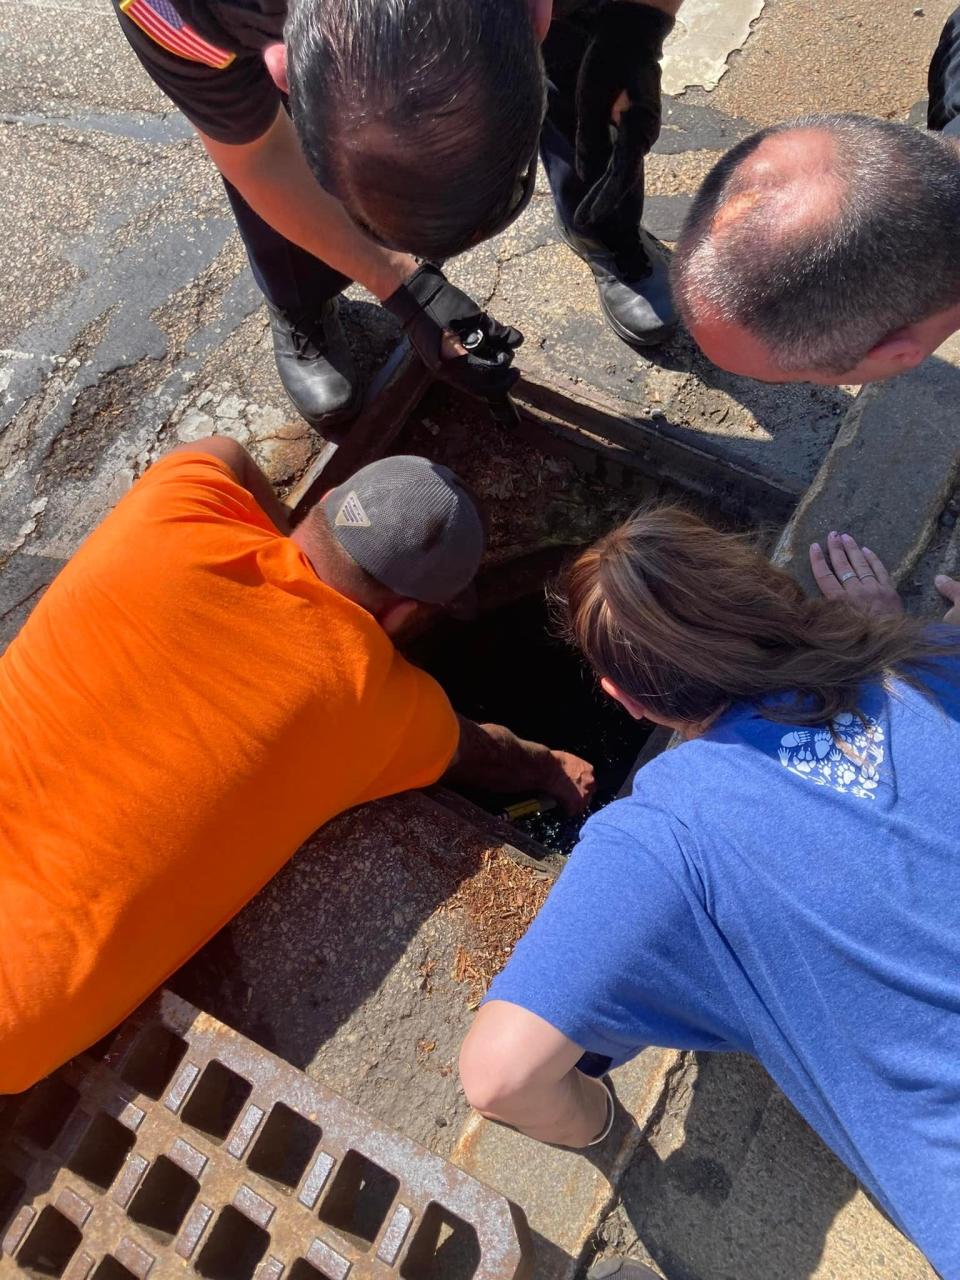 Marlborough's volunteer duck rescue team, including wildlife experts, members of the public works department, and police officers, helped rescue a trio of ducklings that had fallen into a storm drain on Route 20.